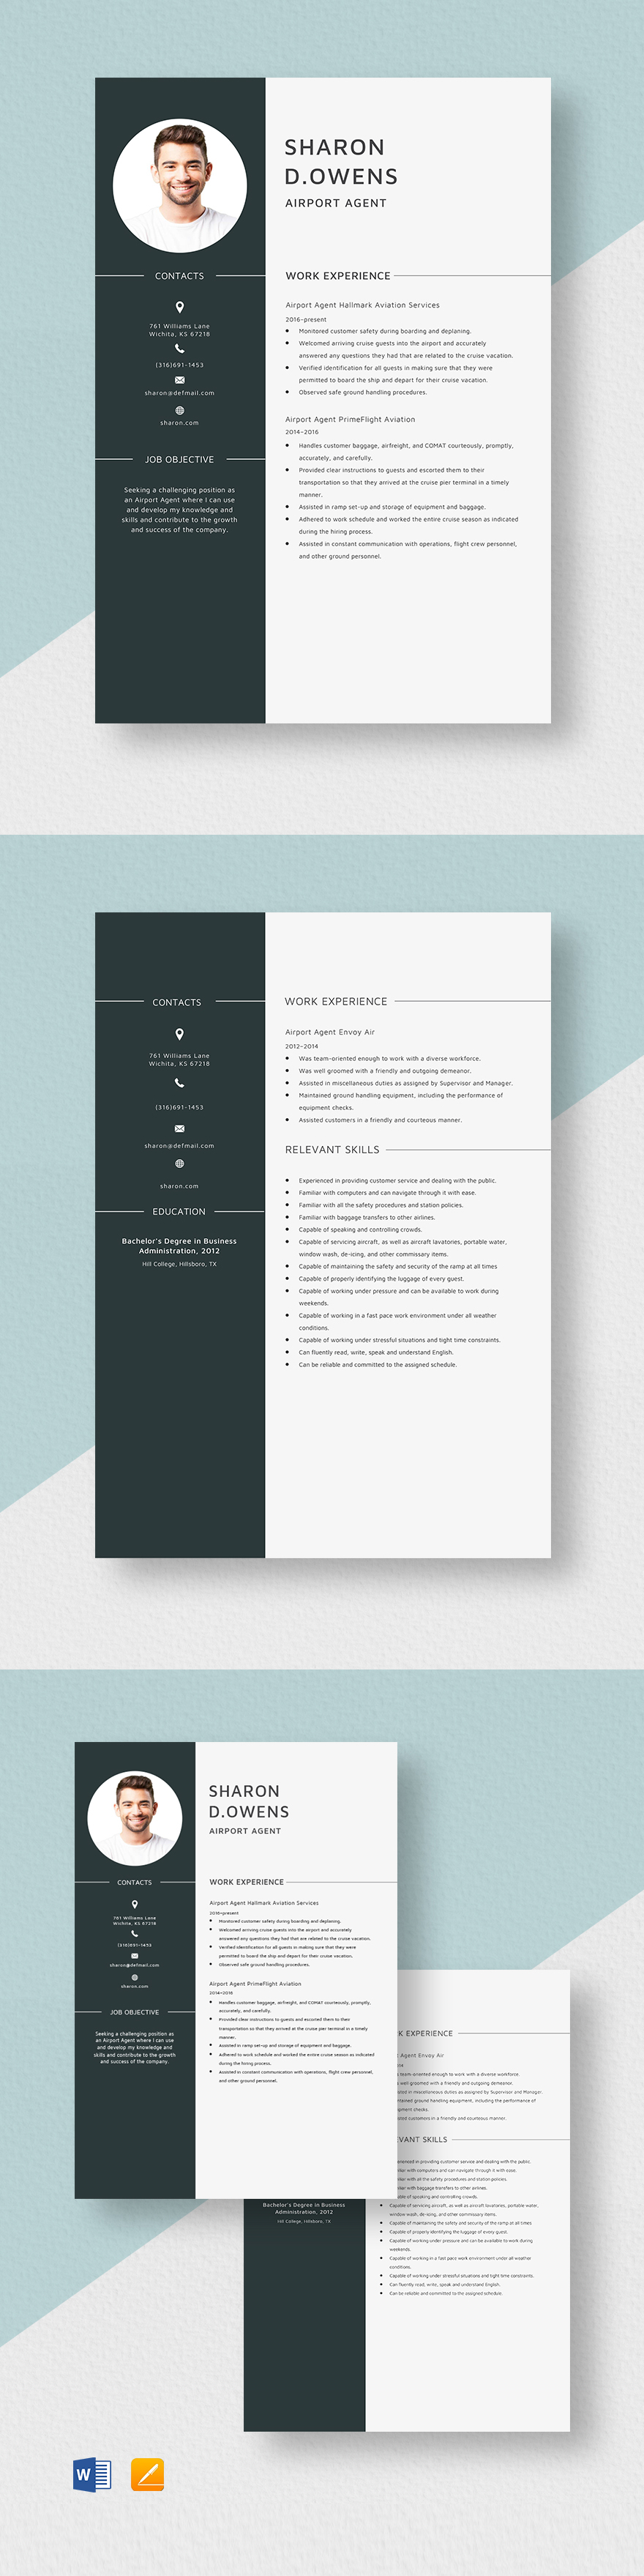 Free Airport Agent Resume Template